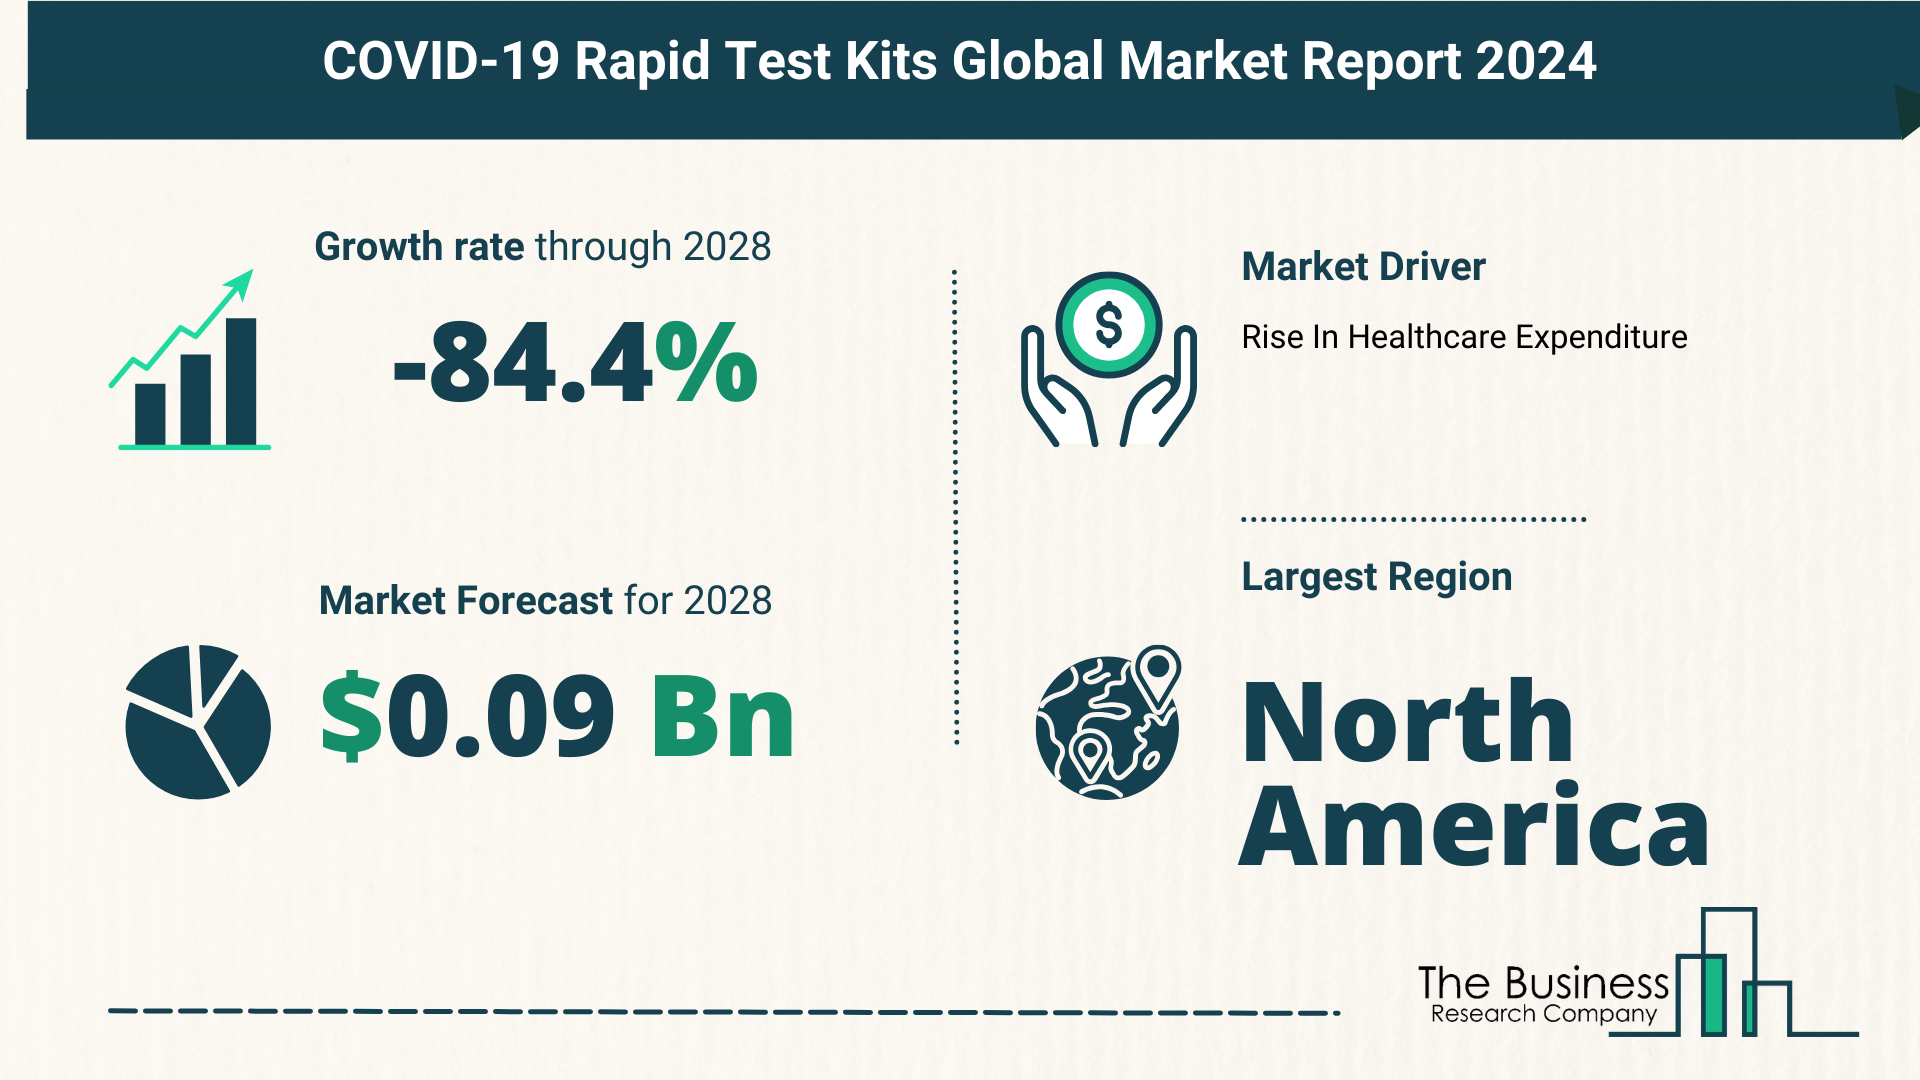 Top 5 Insights From The COVID-19 Rapid Test Kits Market Report 2024